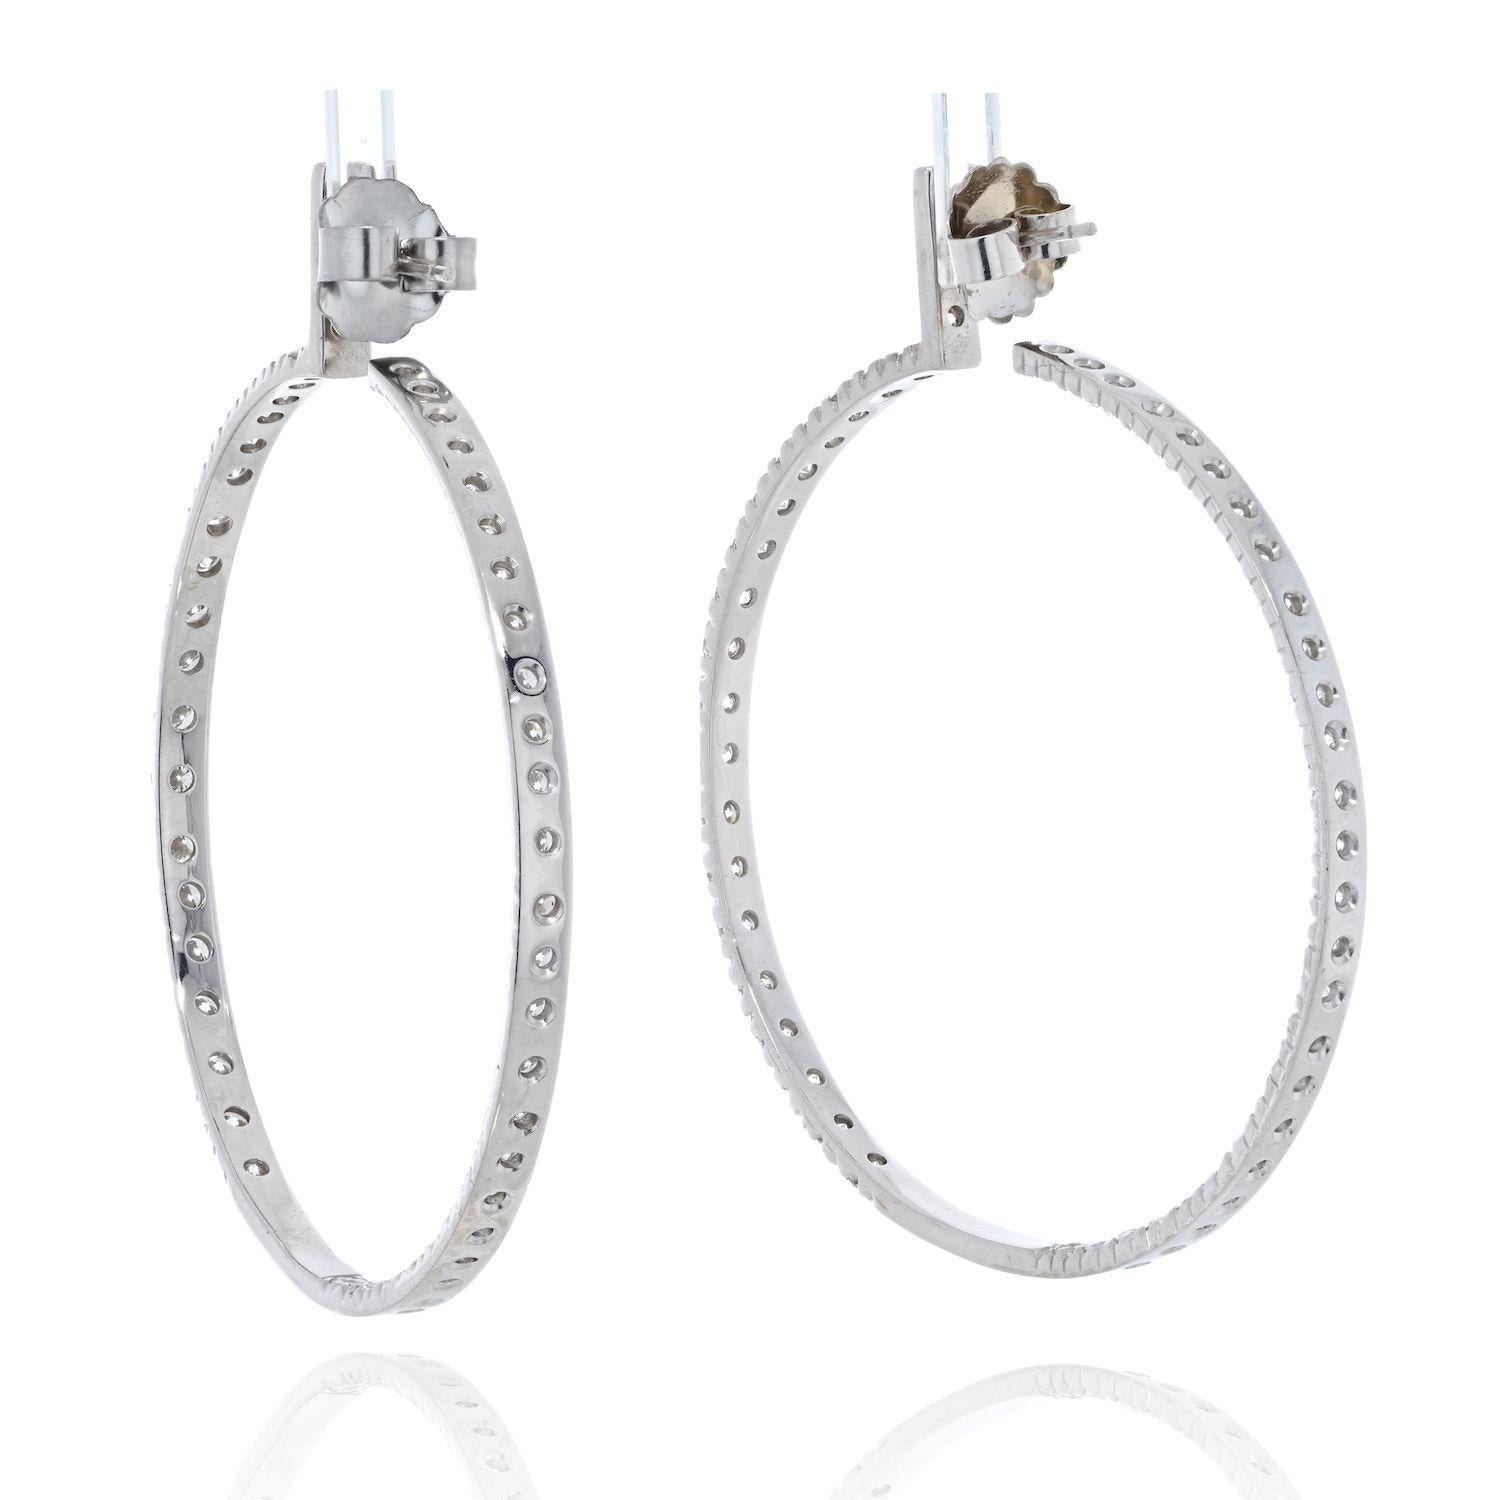 These glowing hoop earrings feature 9.25 total carats of diamonds in 18K white gold, finished with round cut diamonds mounted inside and out. 
2 inches wide this is a an earring that will stop traffic and will make you the star of the show. Long